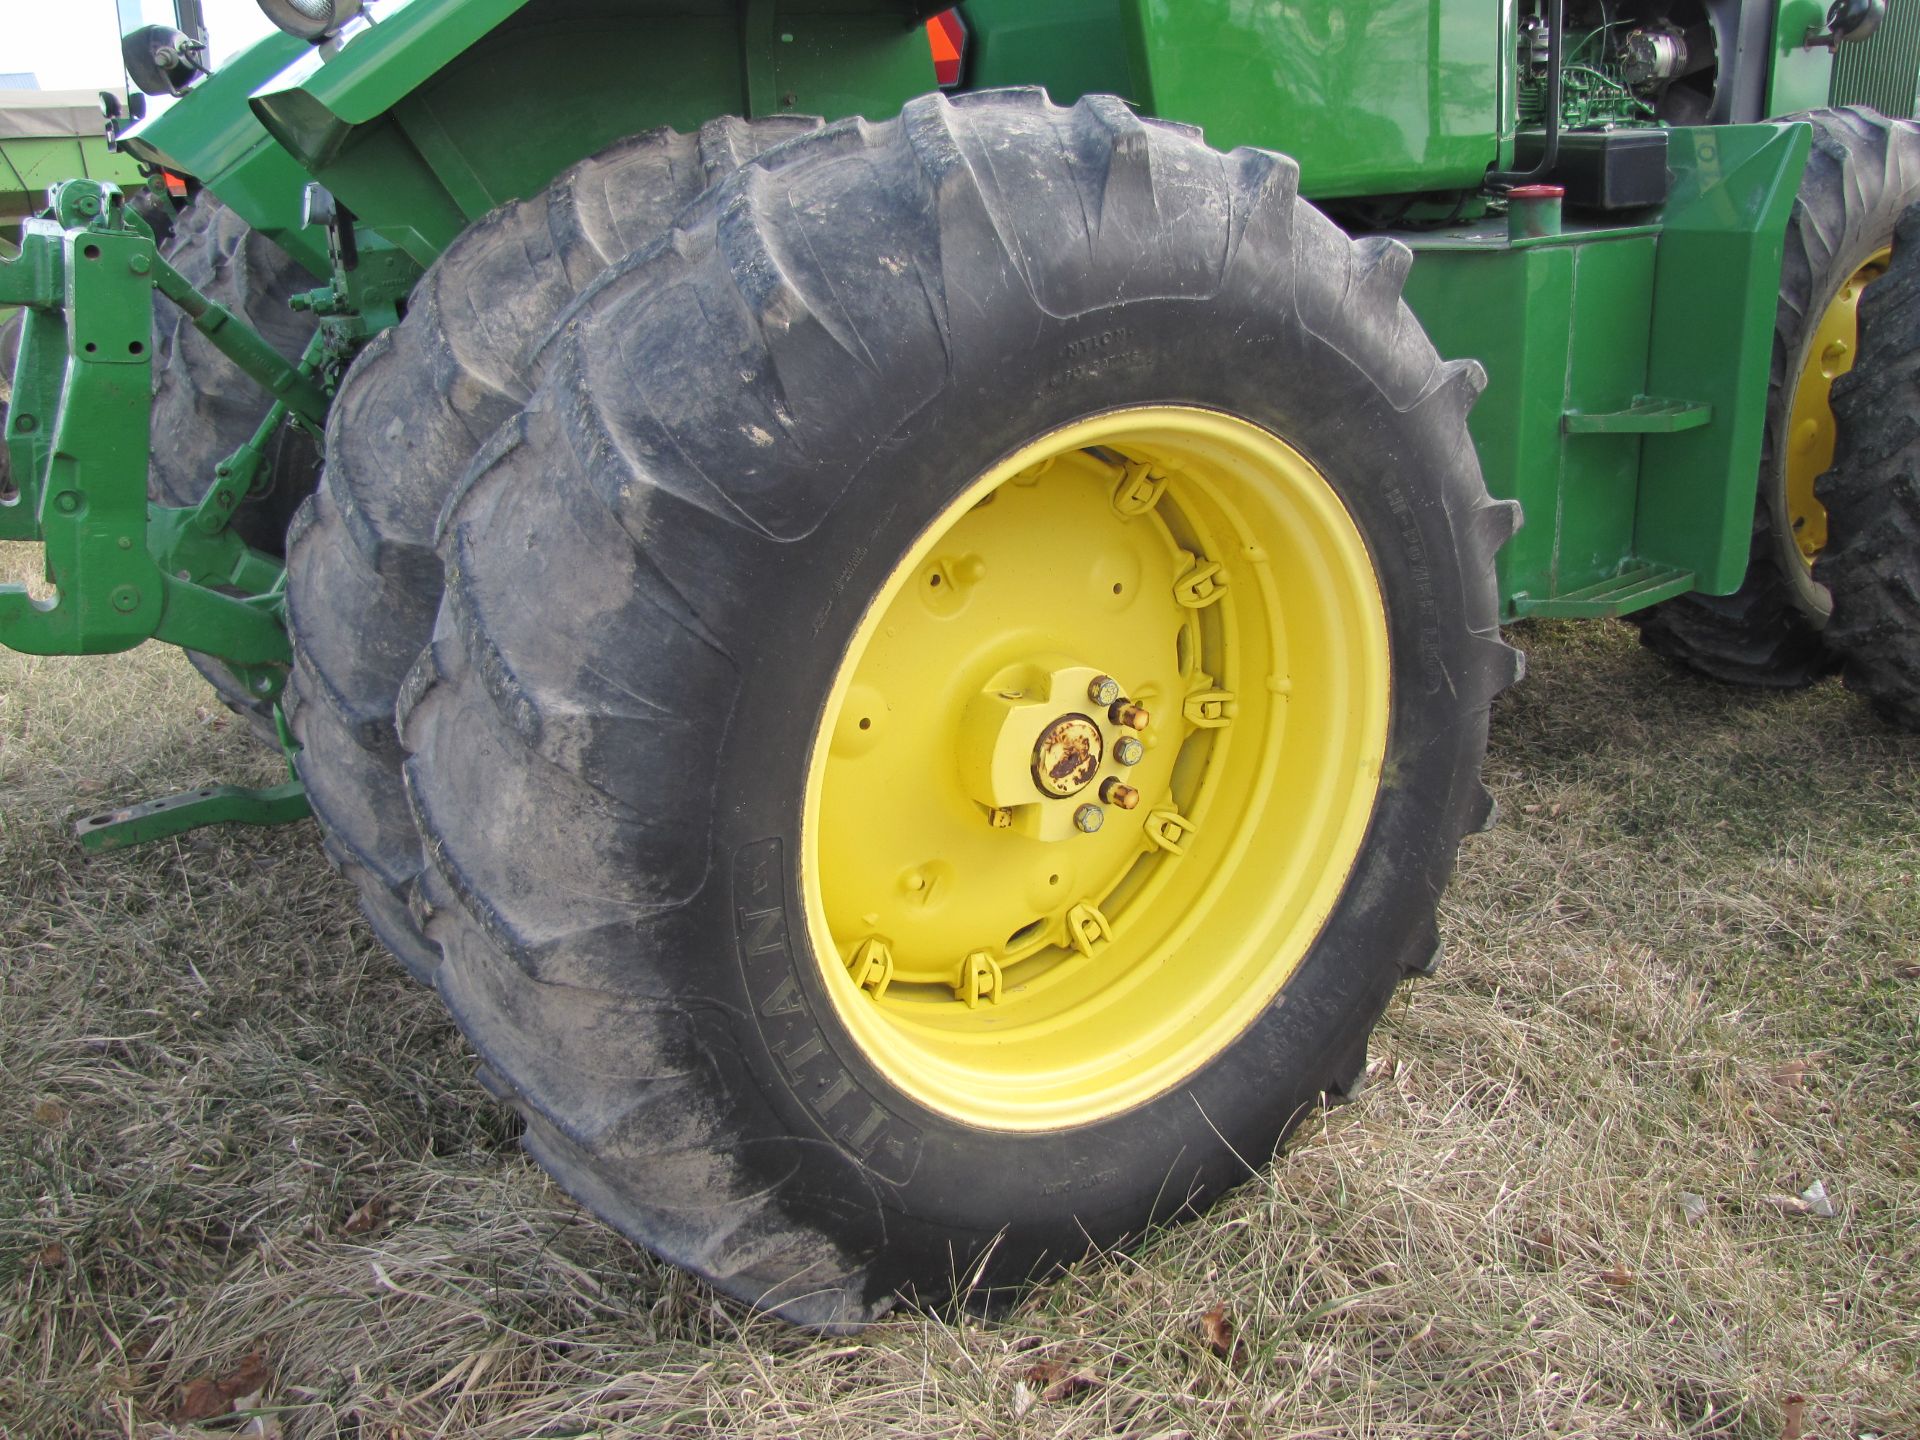 John Deere 8440 tractor, 4WD, C/H/A, 18.4-34 tires, 1000 PTO - Image 33 of 61